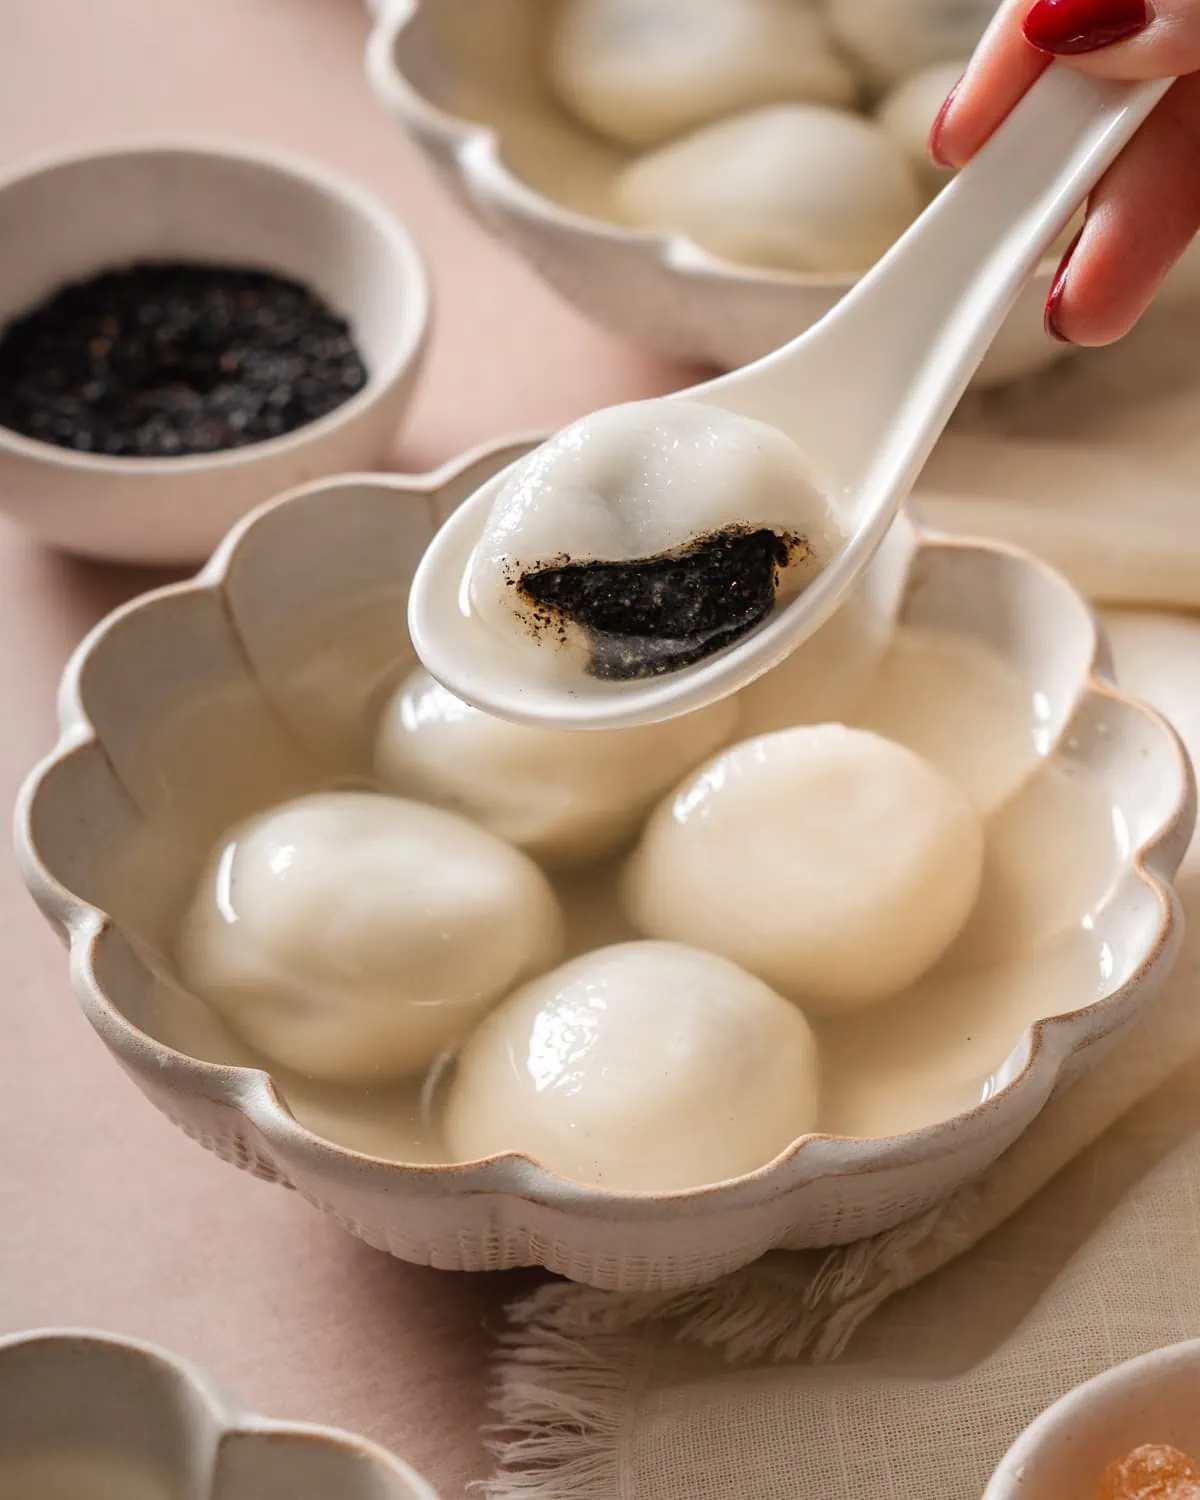 A spoon holding up a bit open tang yuan over a bowl of more tang yuan.